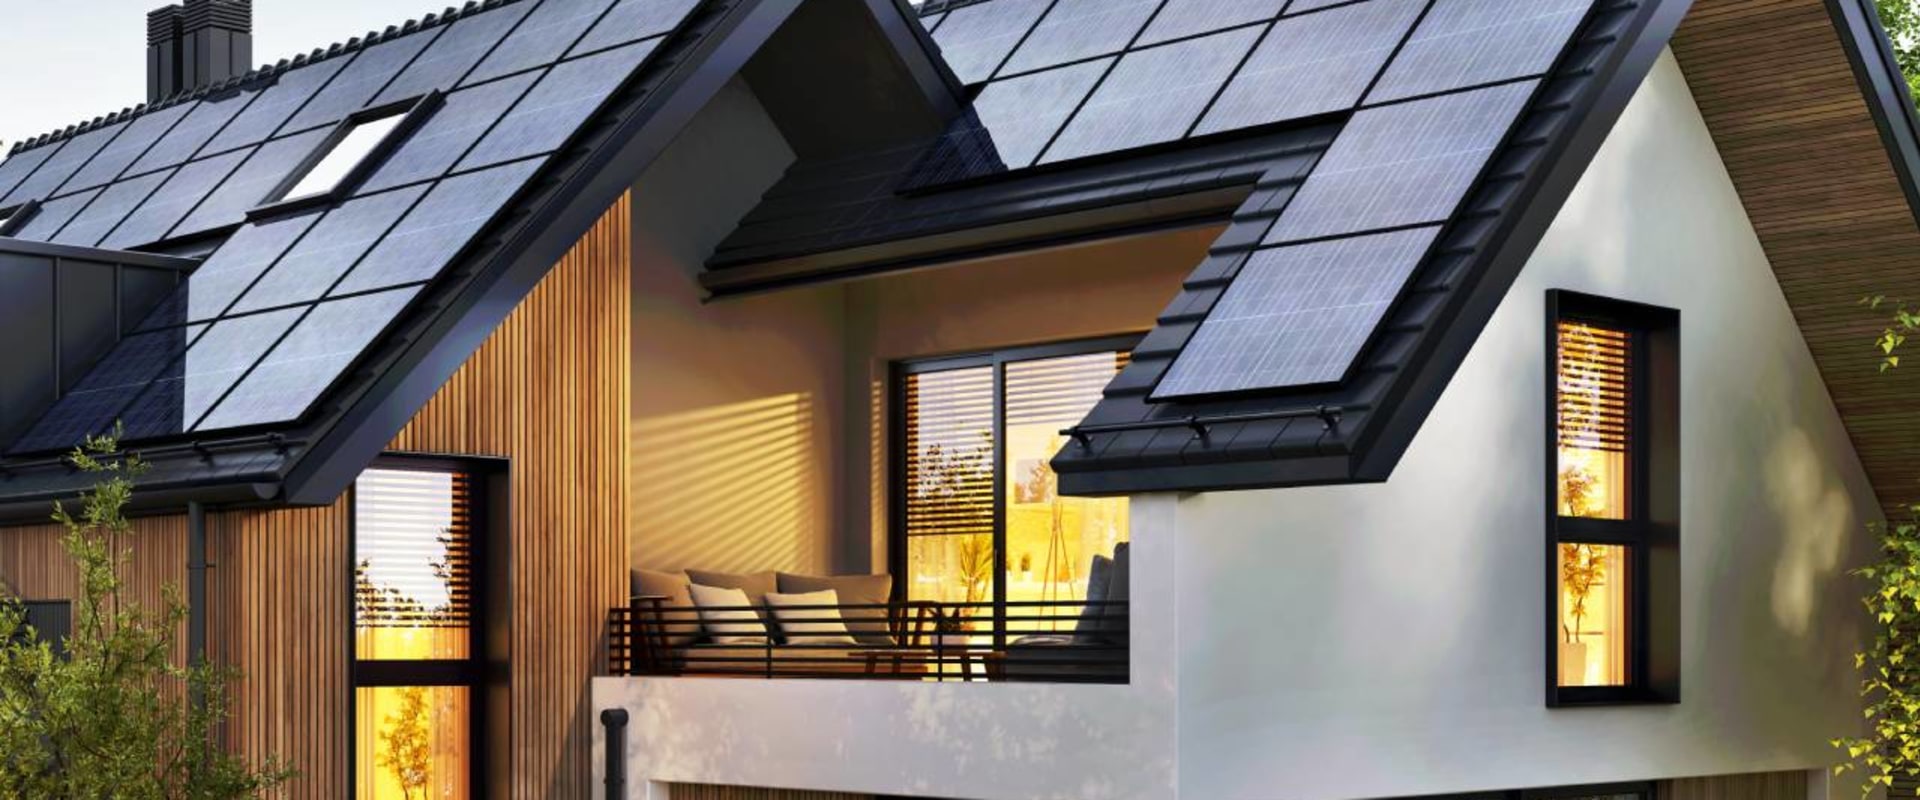 How Solar-Powered Appliances Can Make Your Home More Sustainable and Energy-Efficient